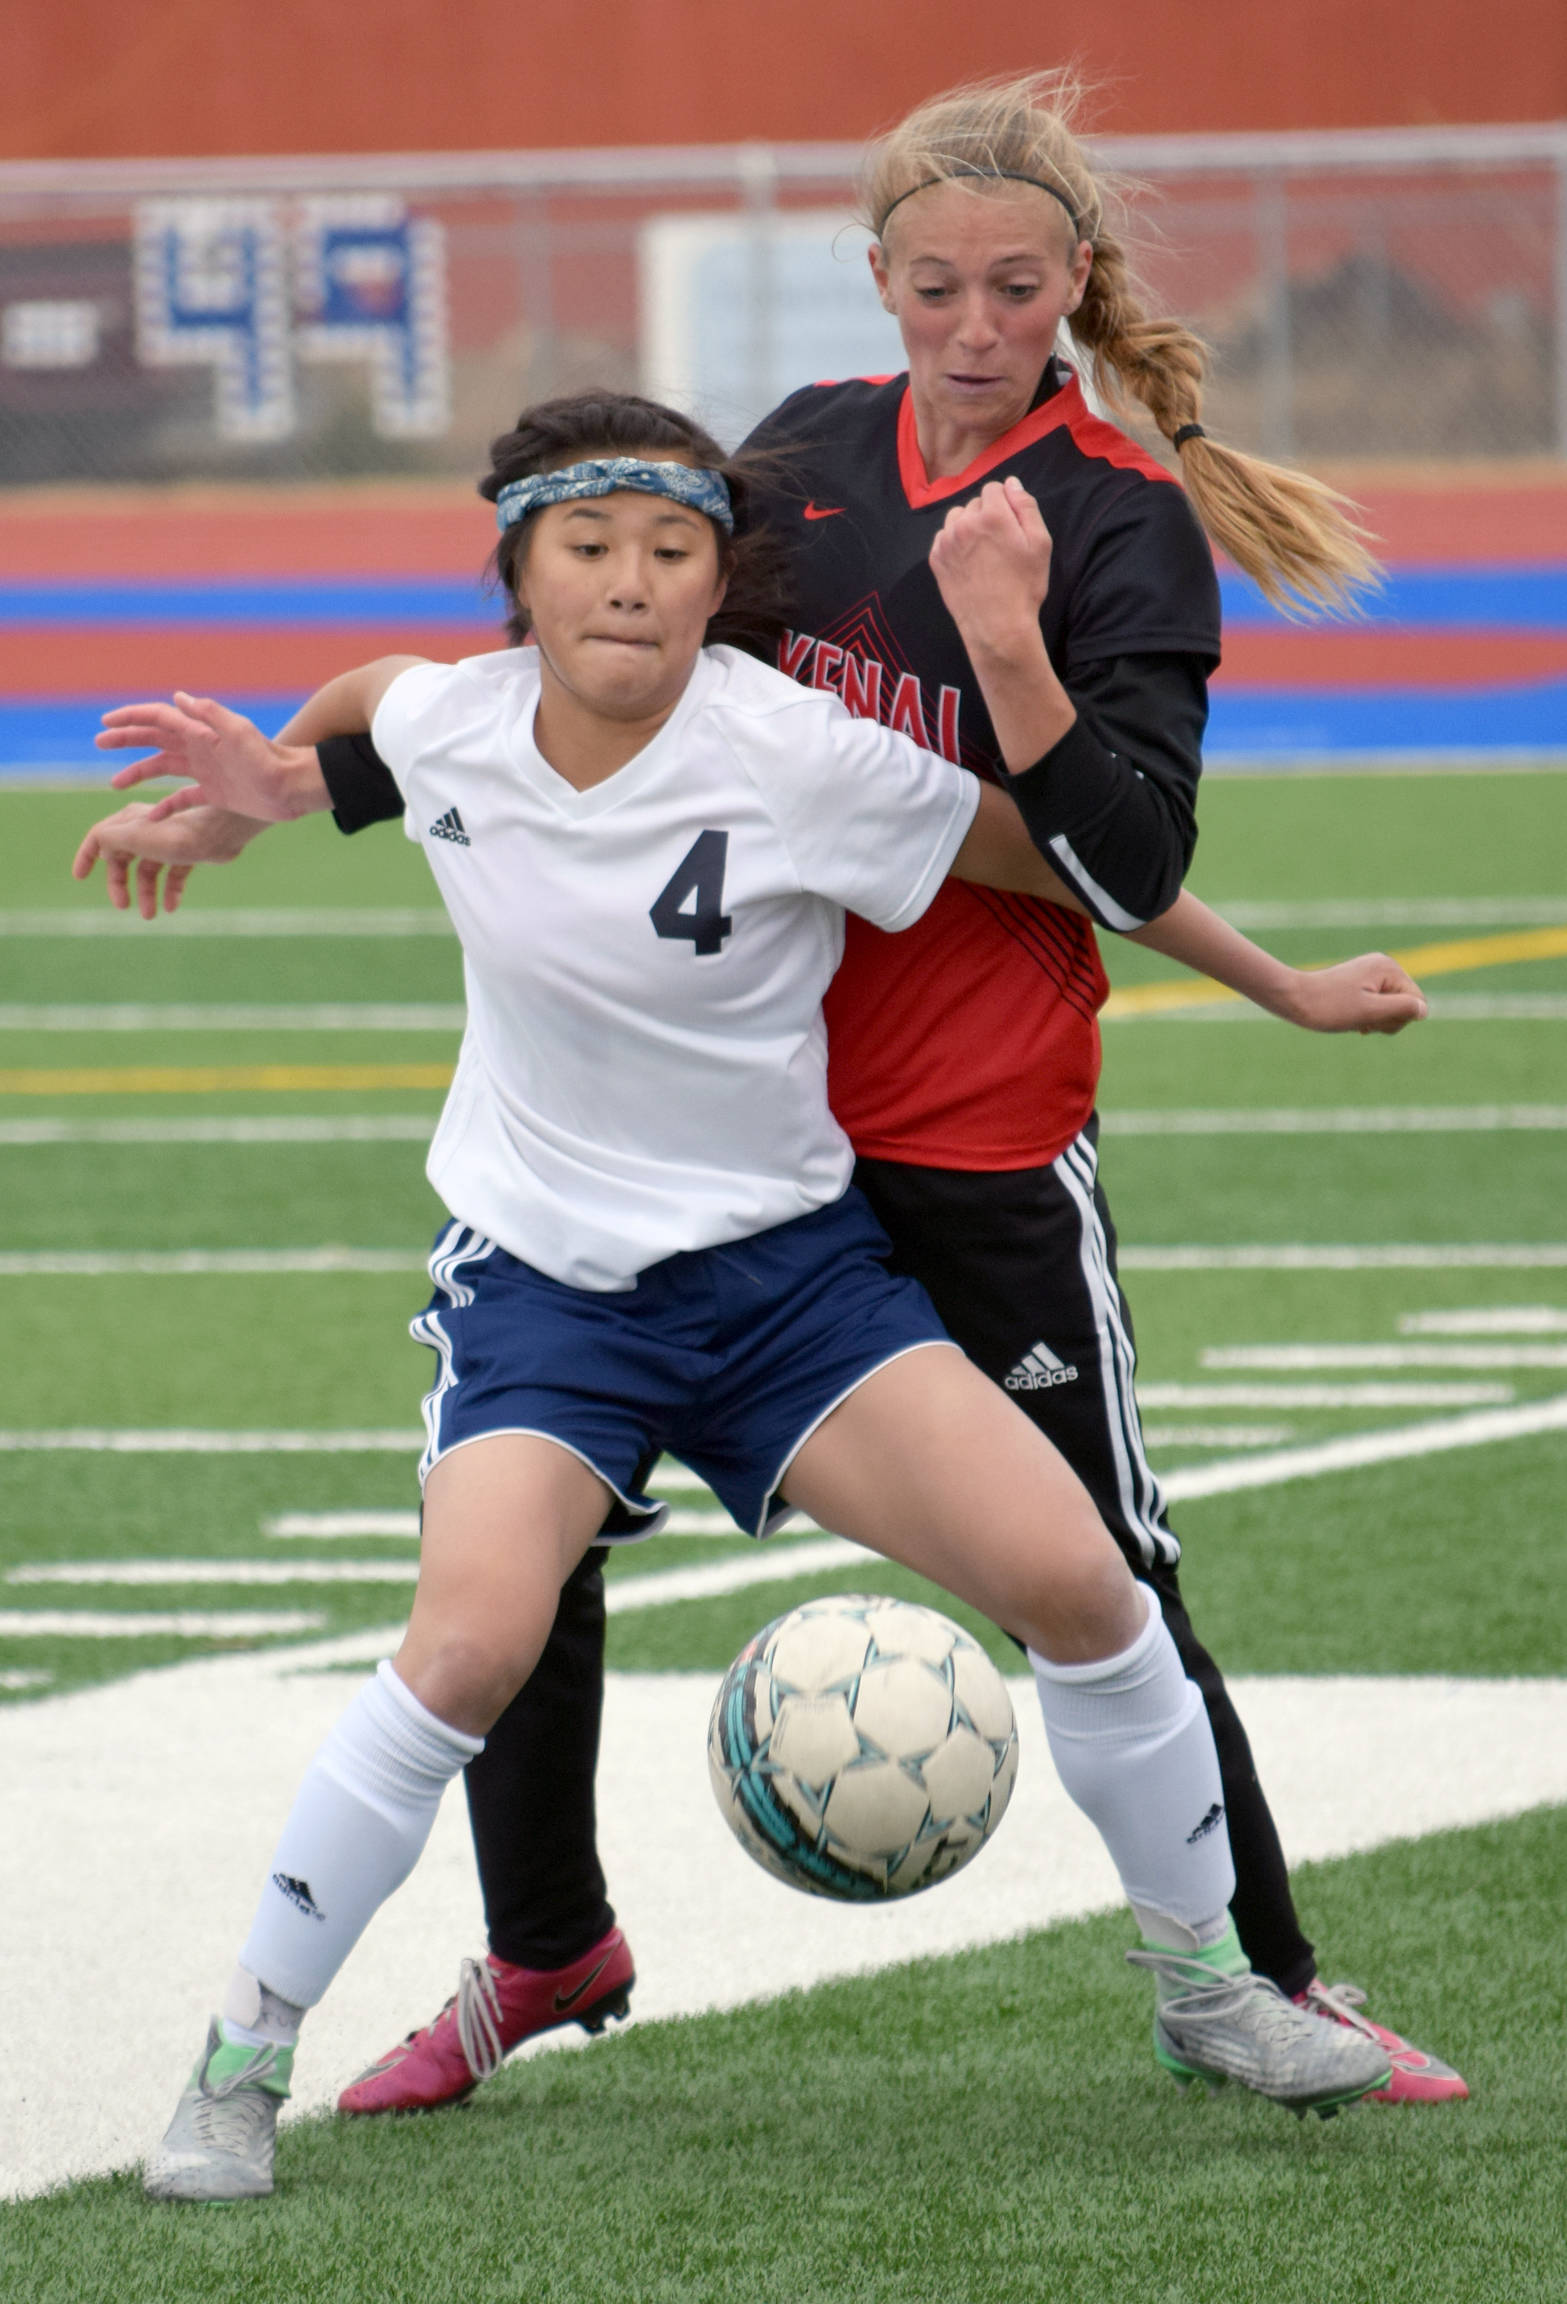 Soldotna’s Meijan Leaf shields the ball from Kenai Central’s Samantha Morse on Tuesday, May 2, 2017, at Soldotna High School. (Photo by Jeff Helminiak/Peninsula Clarion)